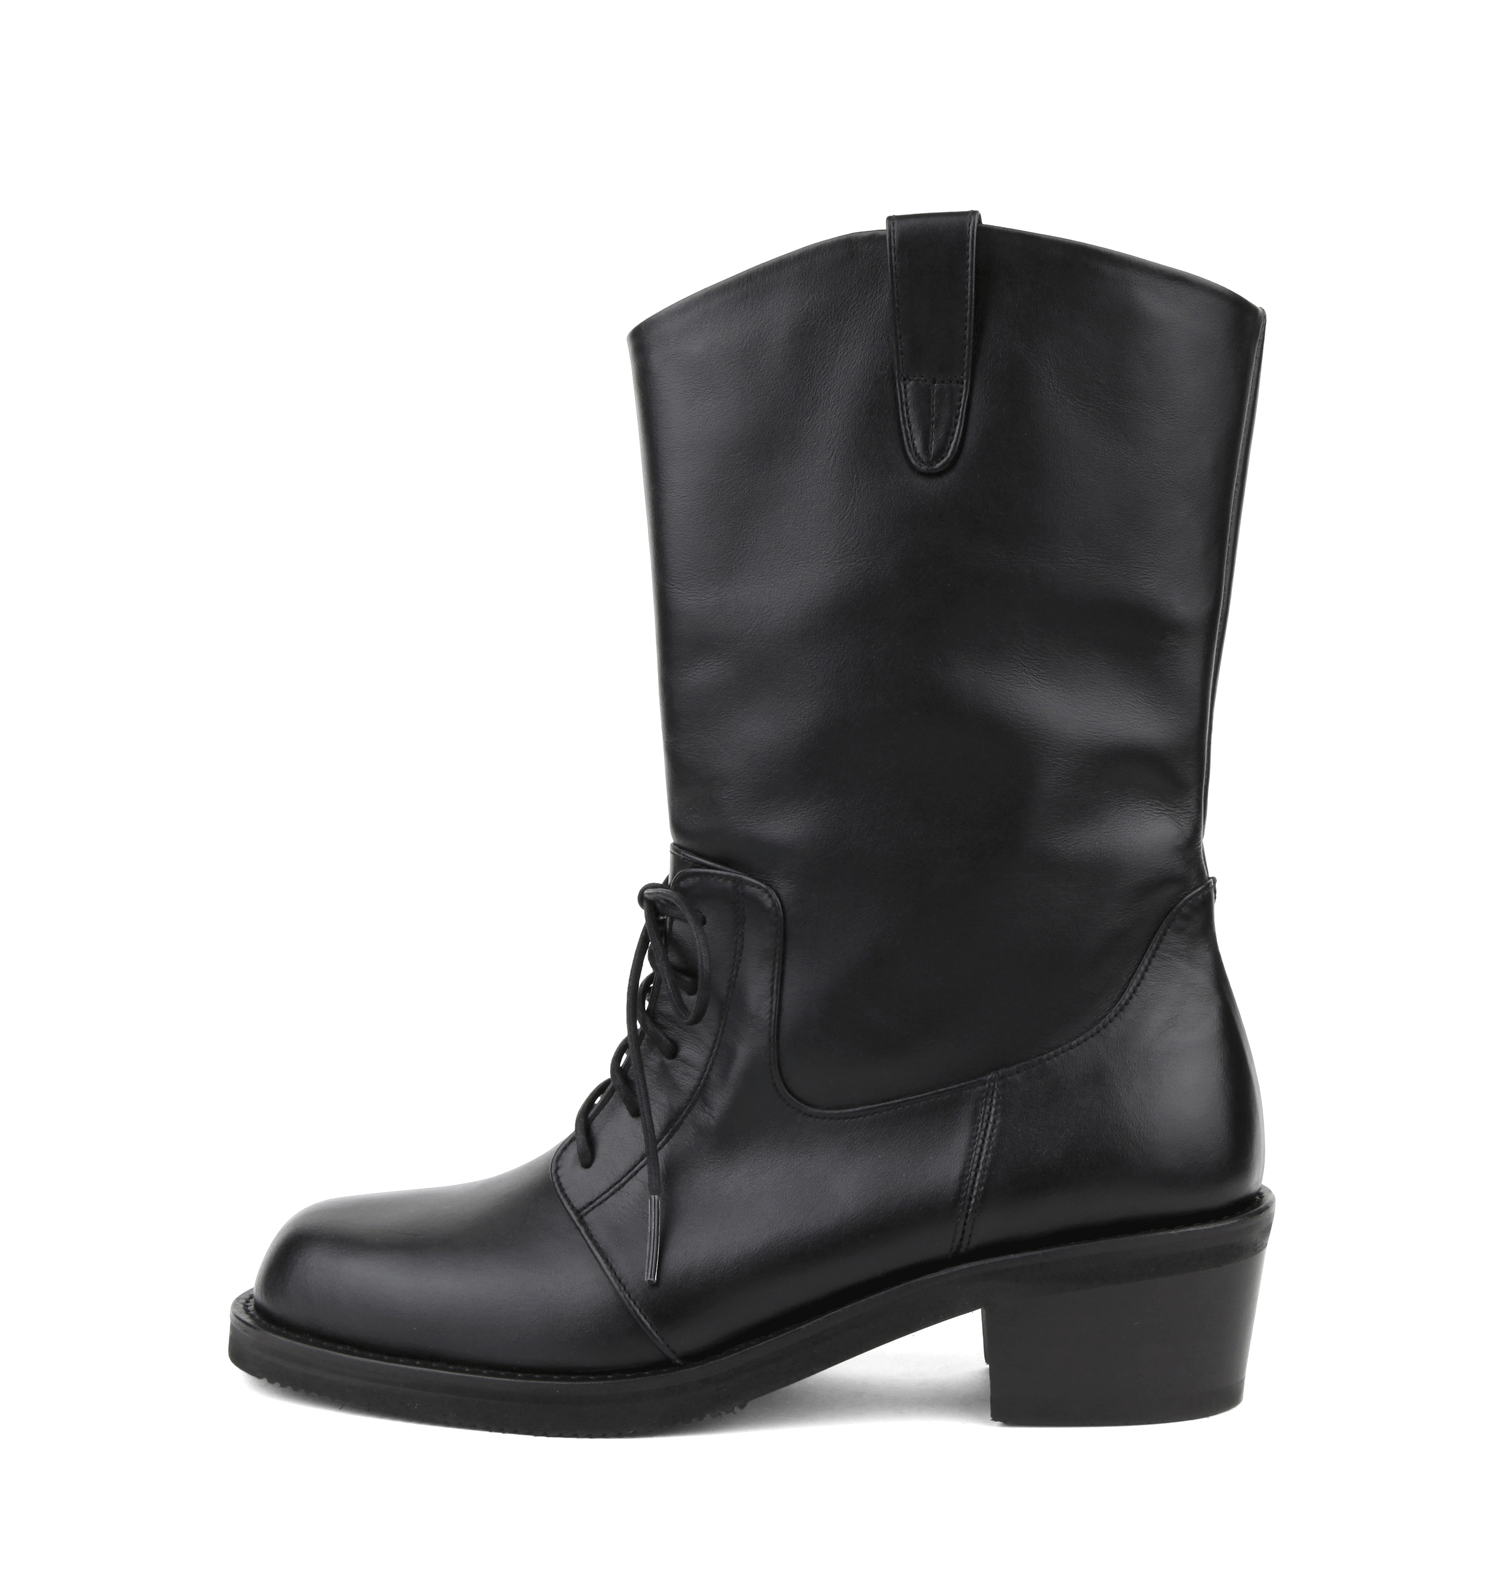 Ride with me Middle Boots - Black